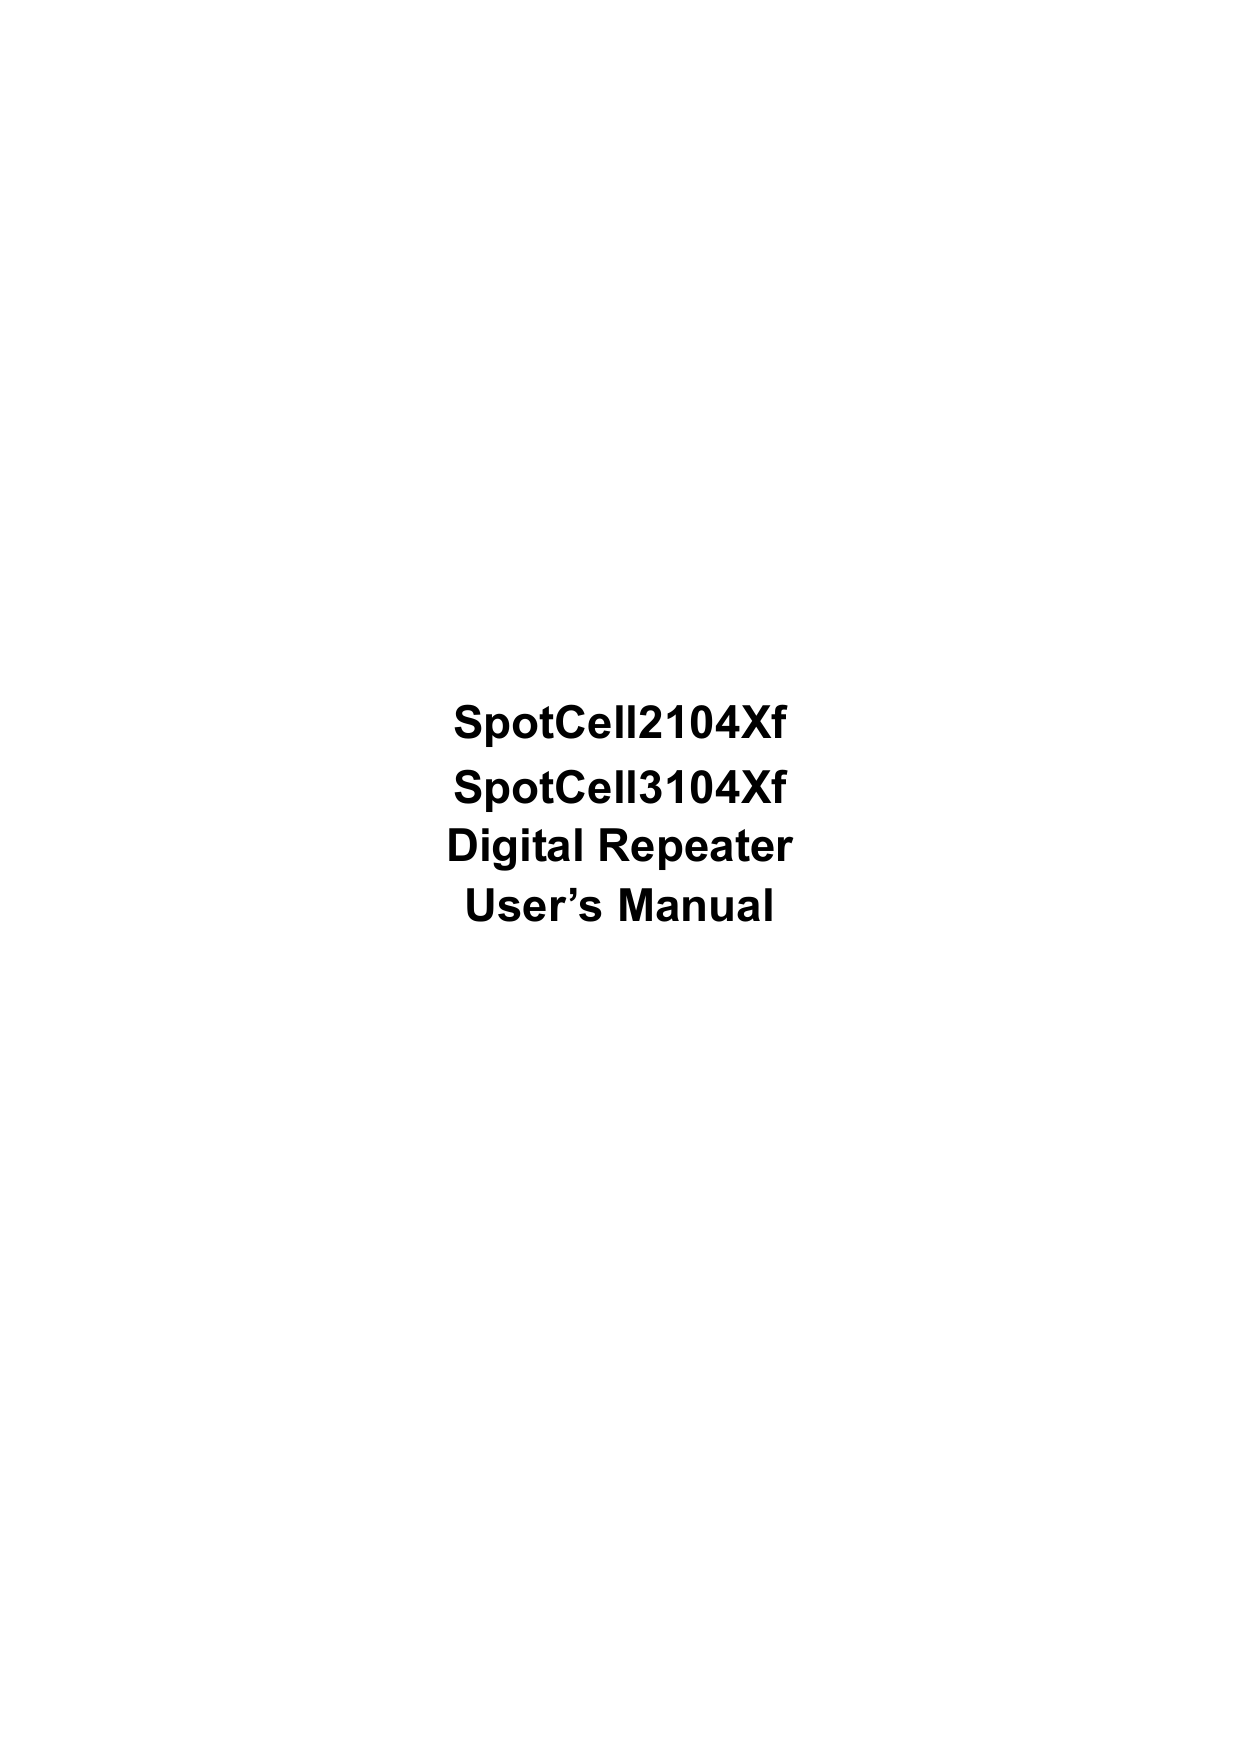            SpotCell2104Xf SpotCell3104Xf Digital Repeater User’s Manual            